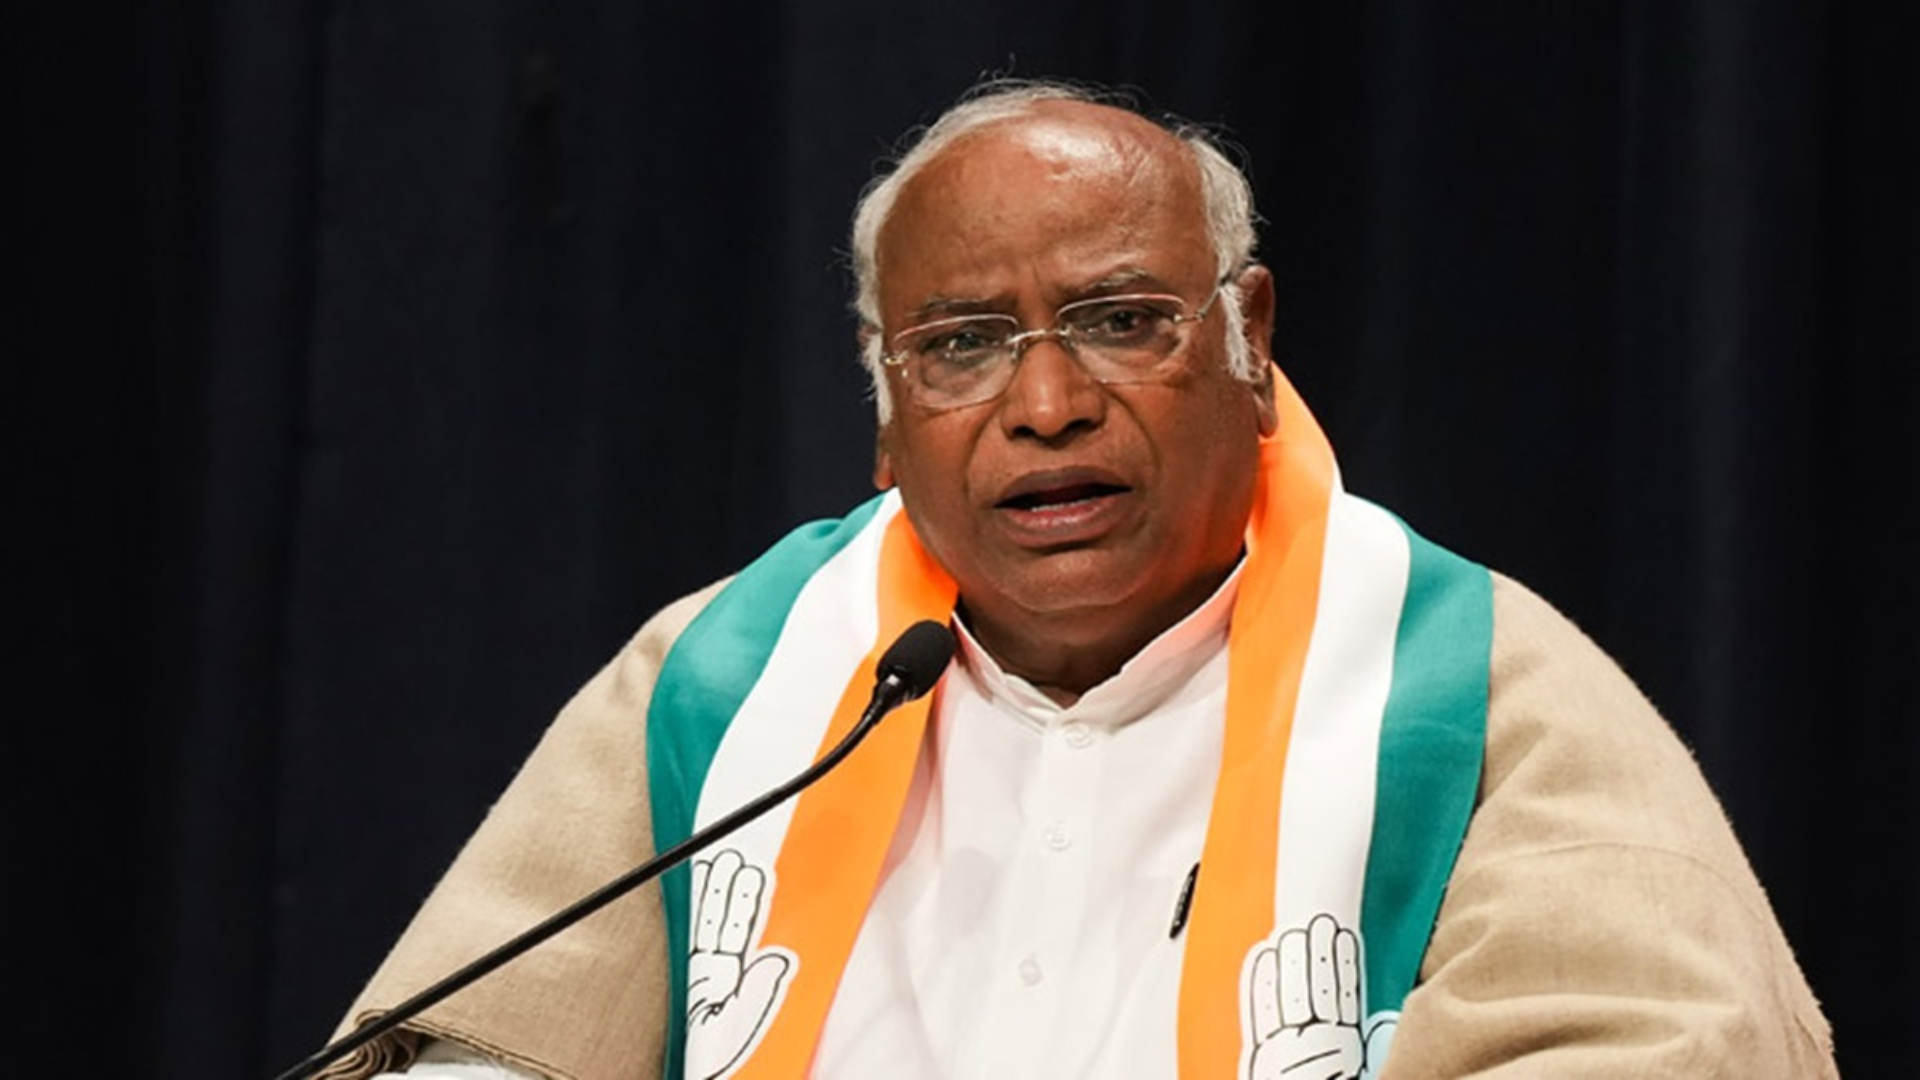 Haryana CM Accuses Congress of Disrespecting Soldiers, Targets Kharge